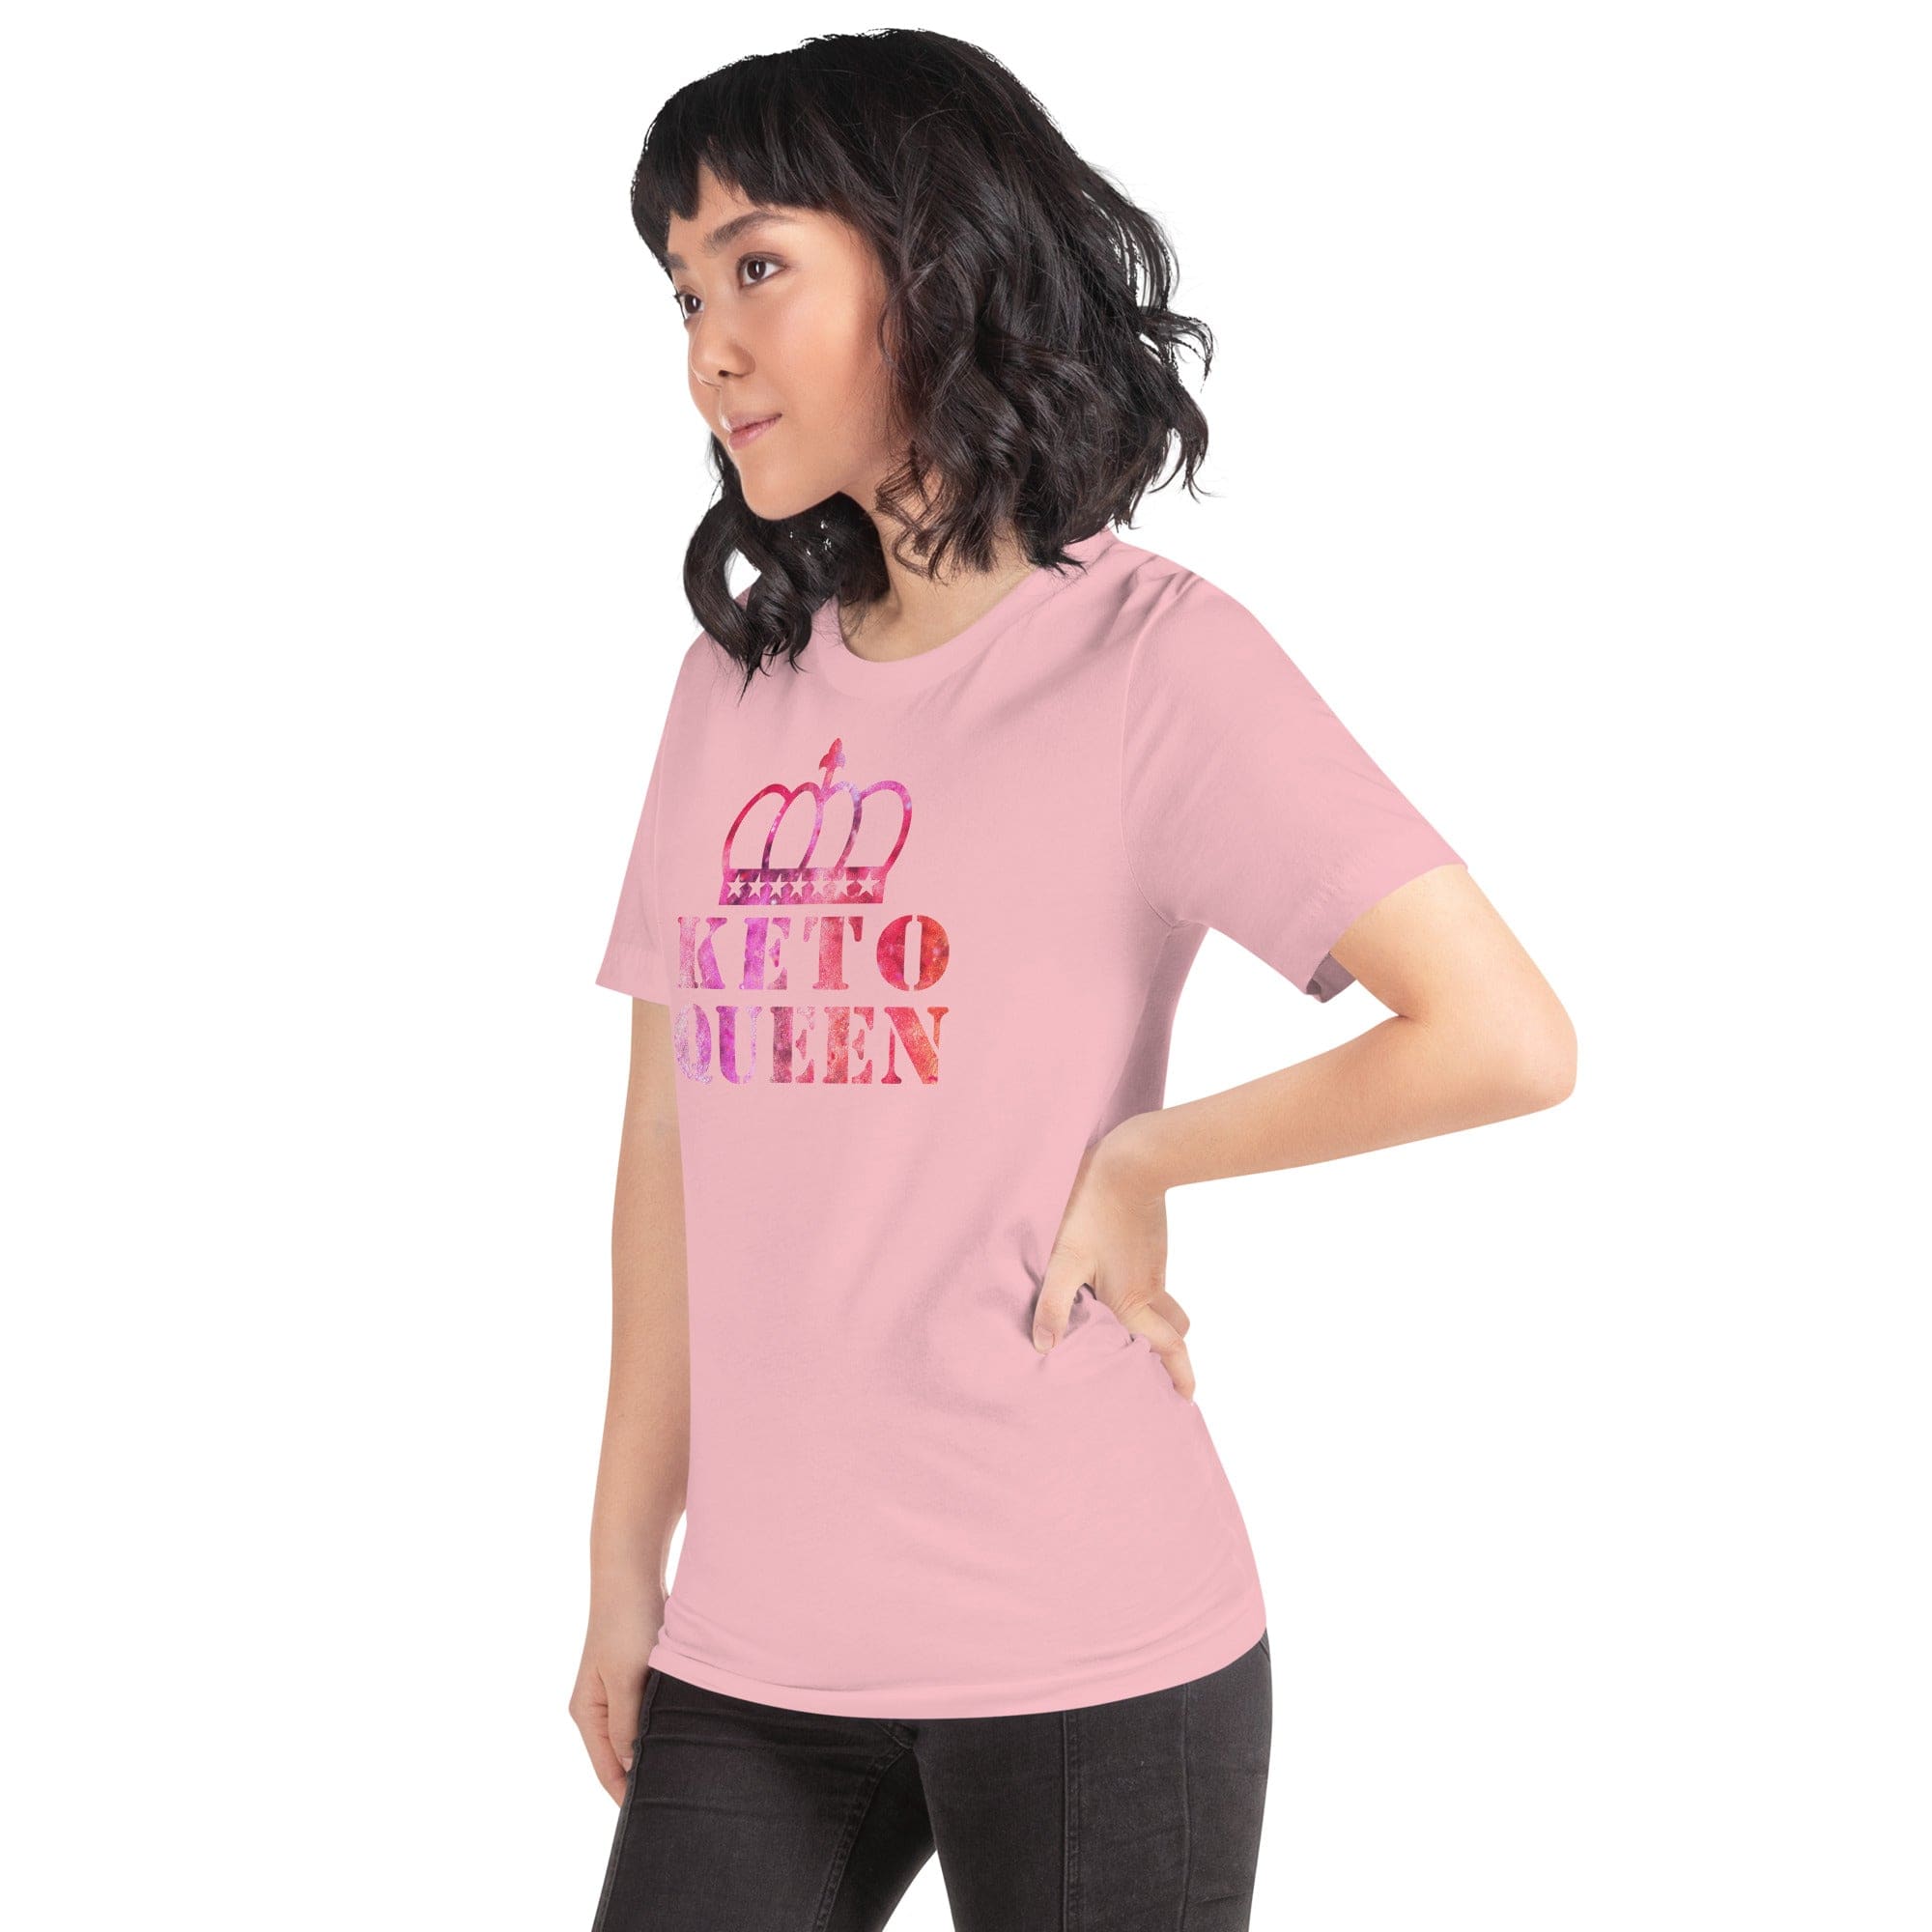 Shop Keto Queen Ketogenic Diet Graphic Tee Shirt, Tops, USA Boutique